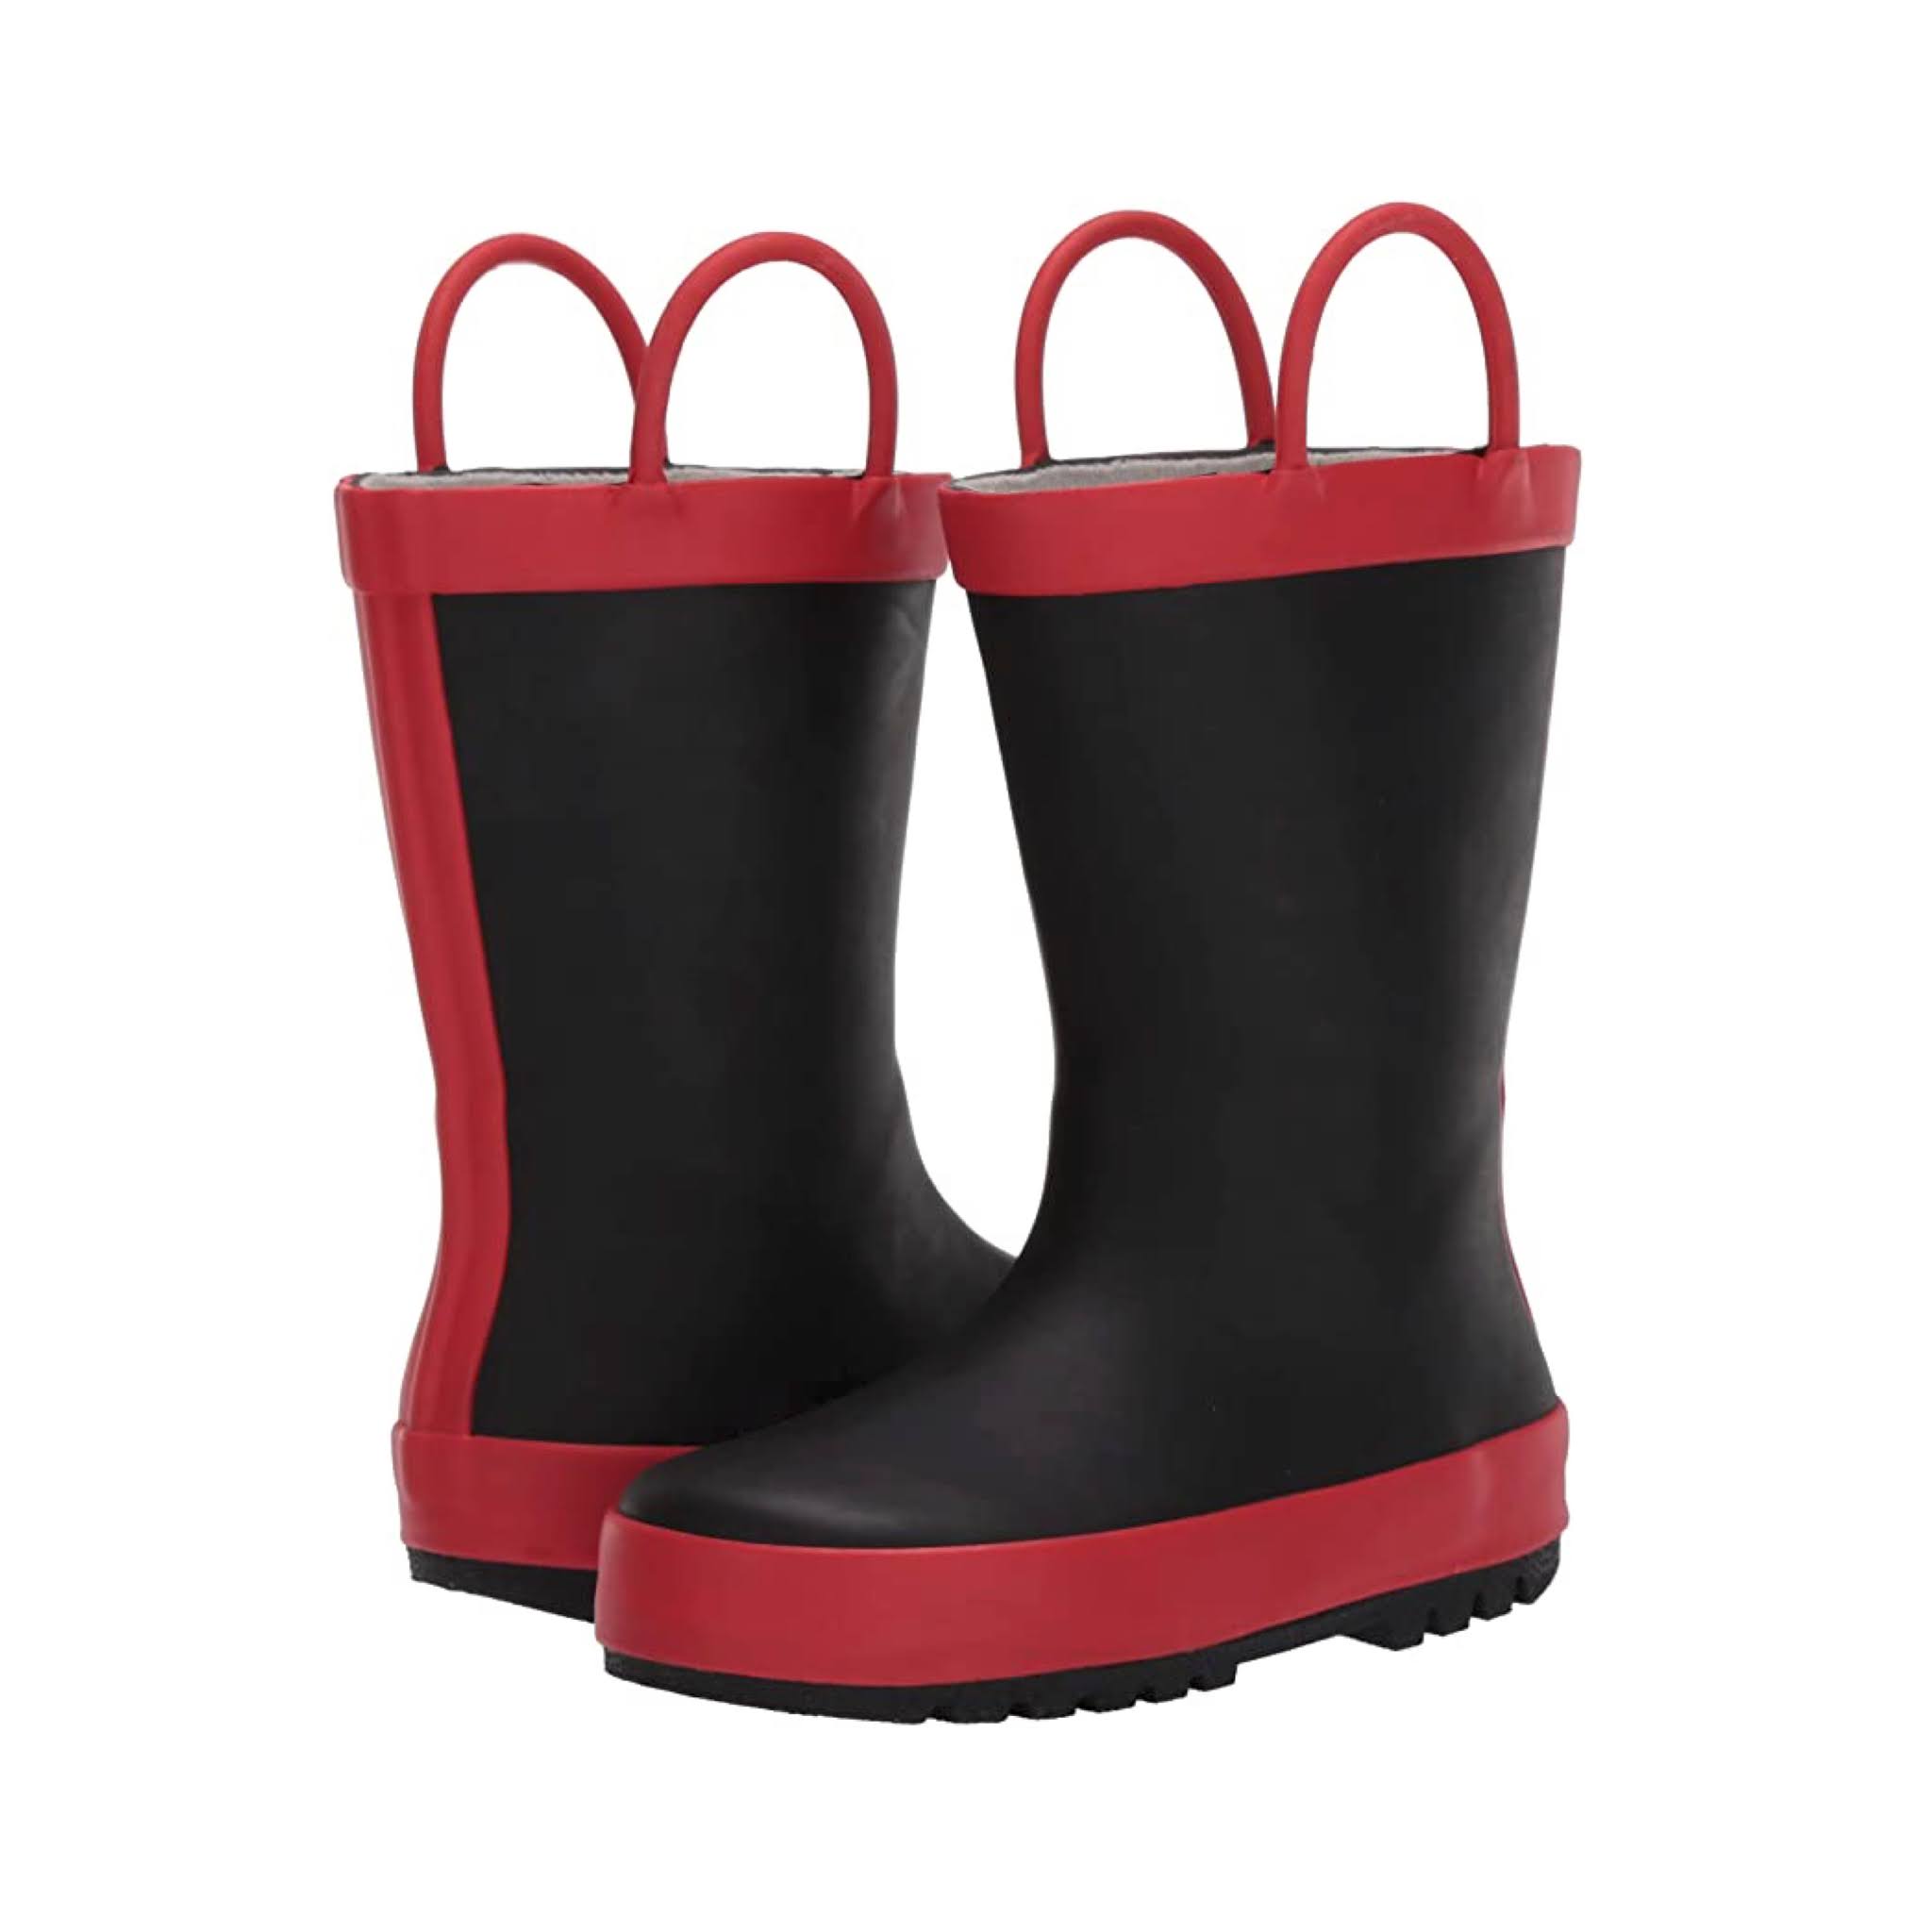 Boys Red & Black Rain Boots from Amazon